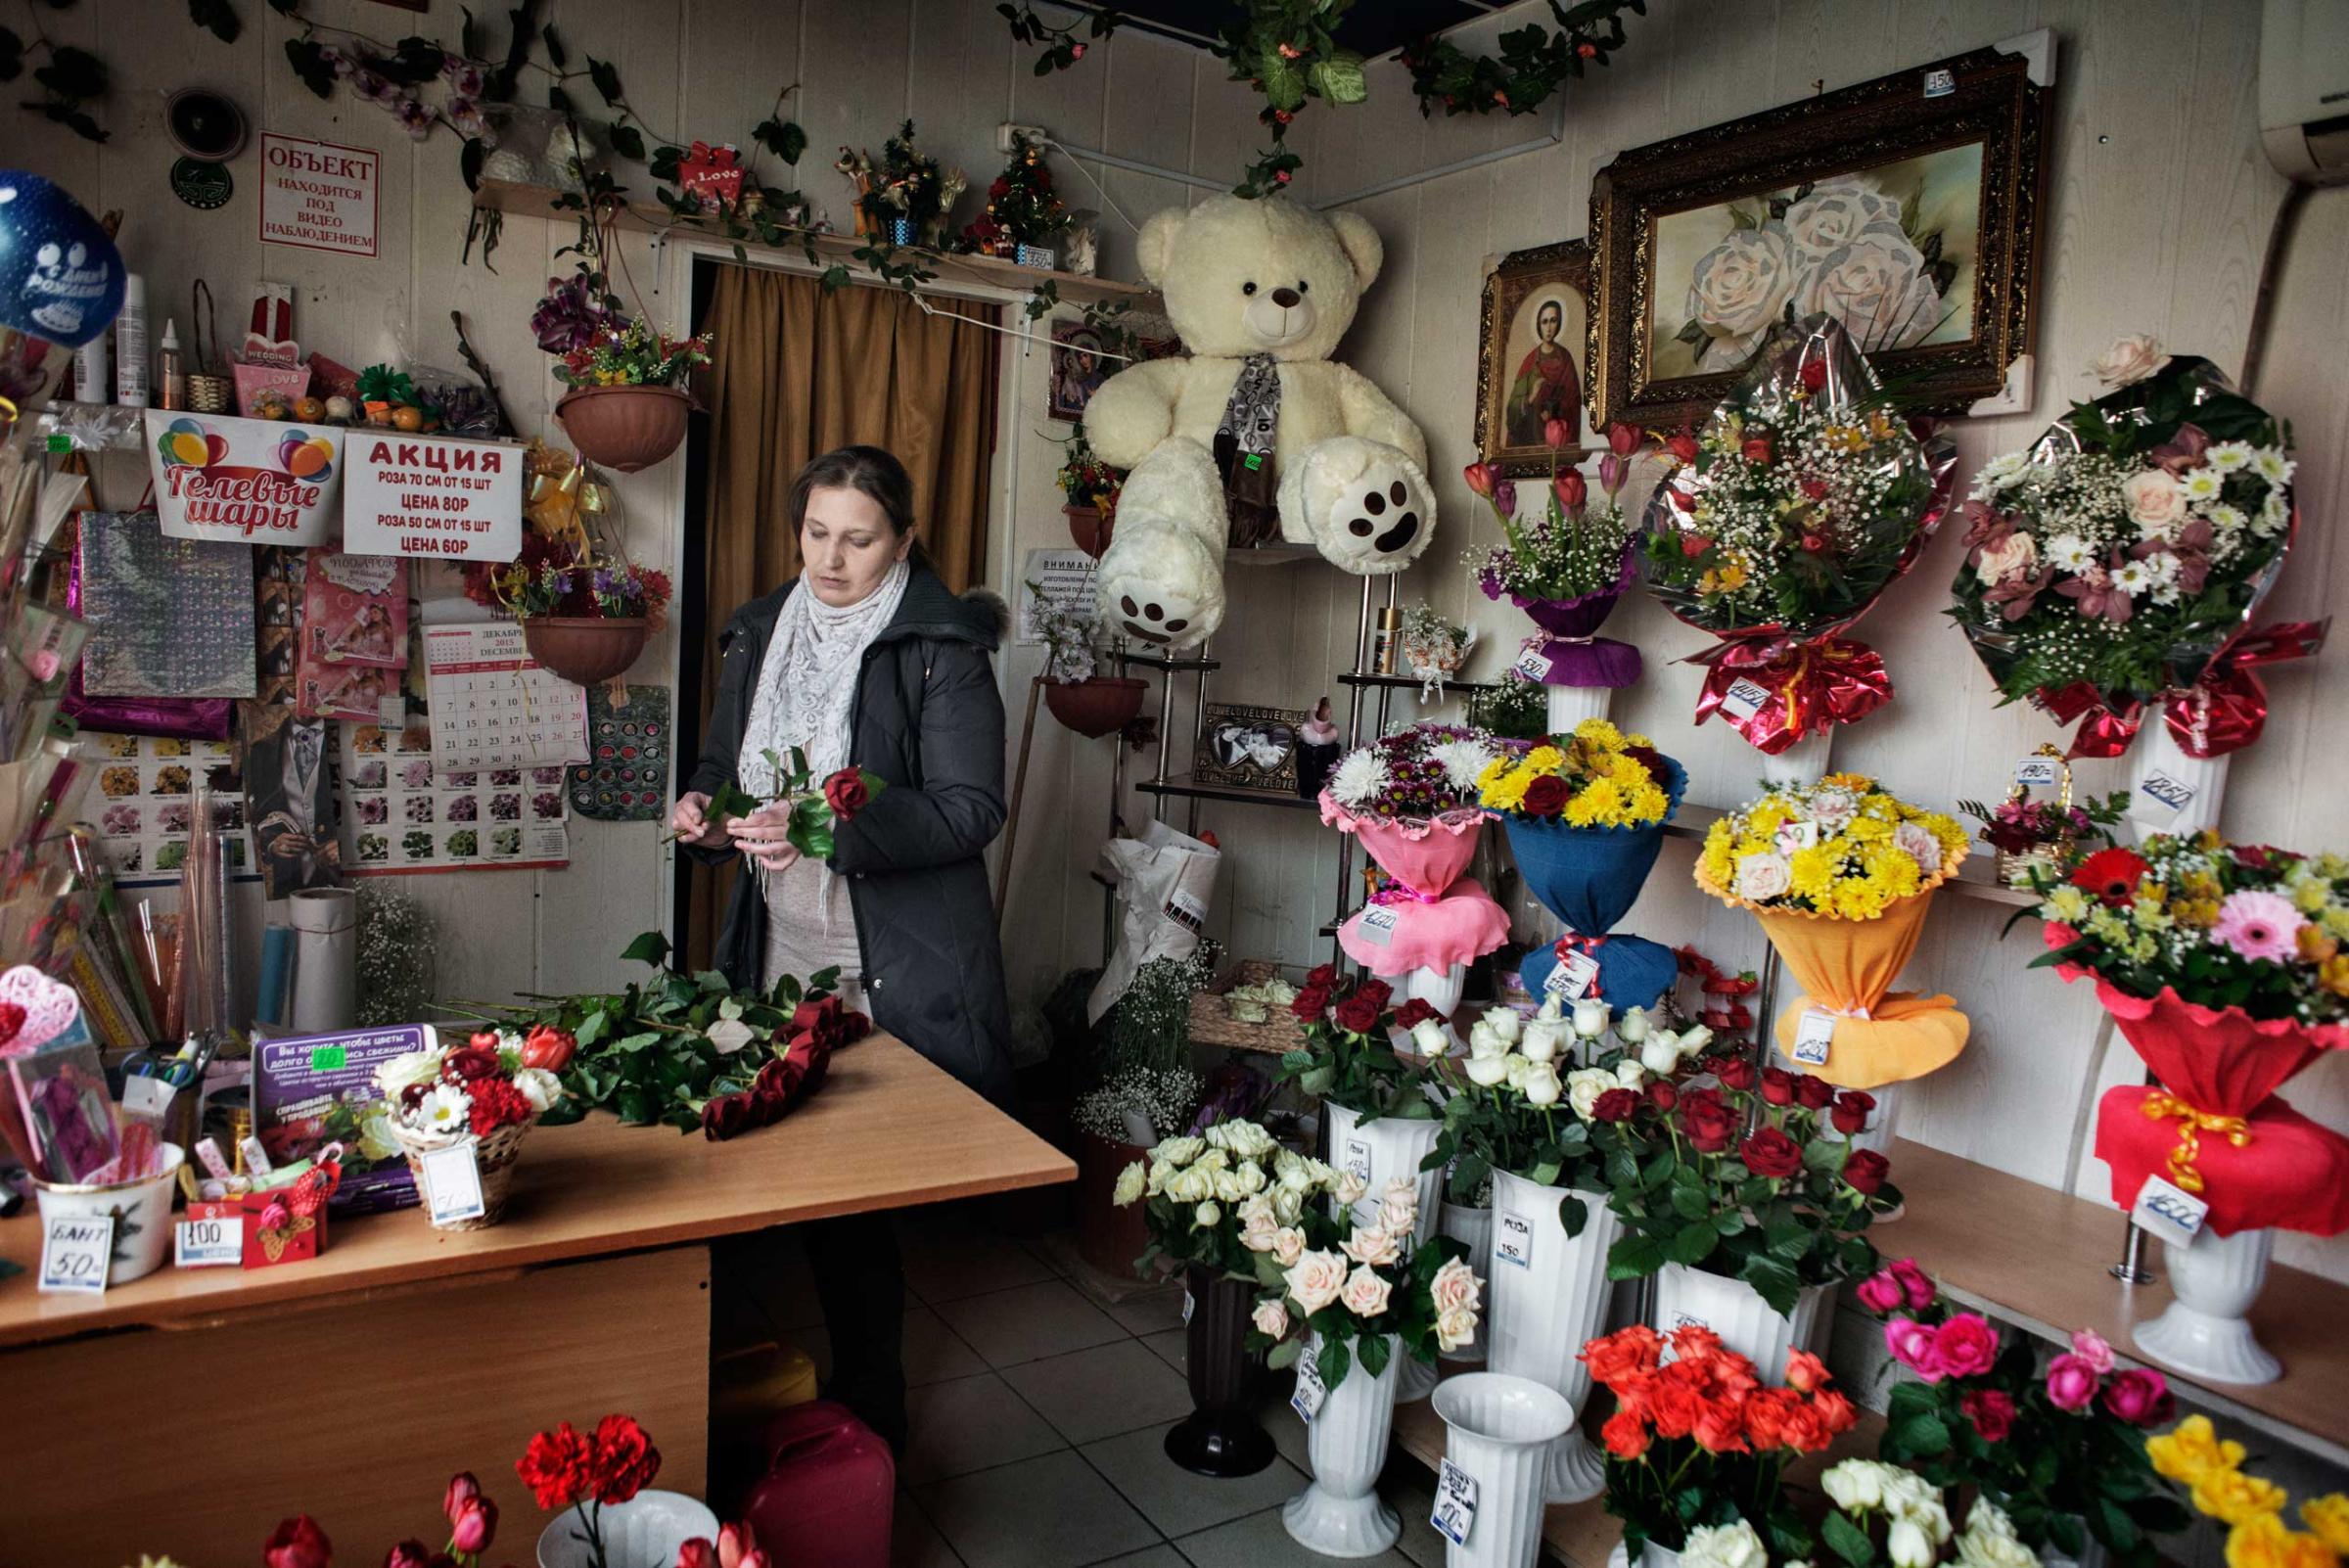 Natalya in the flower shop where she's working. His boy friend Alexei died in 2015 because of the large use of Krokodil that reduced drastically his immune system.